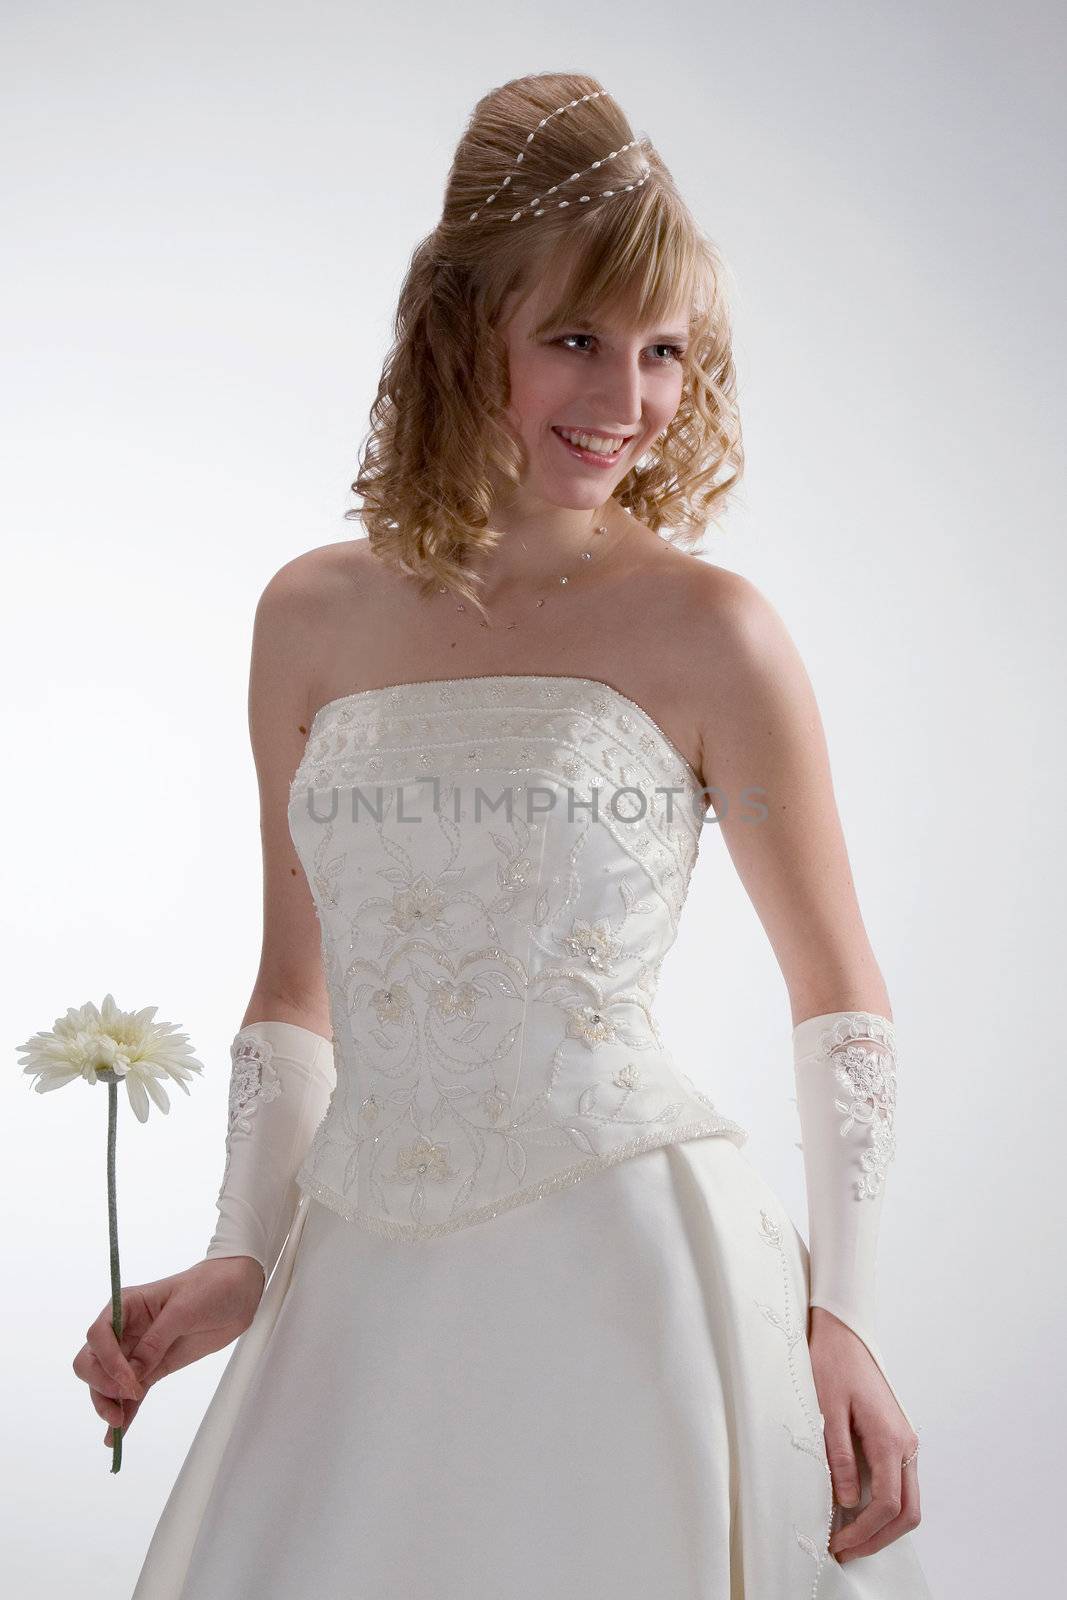 Beautiful bride in white dress with charming smile and white flower in her hand on the white background.
